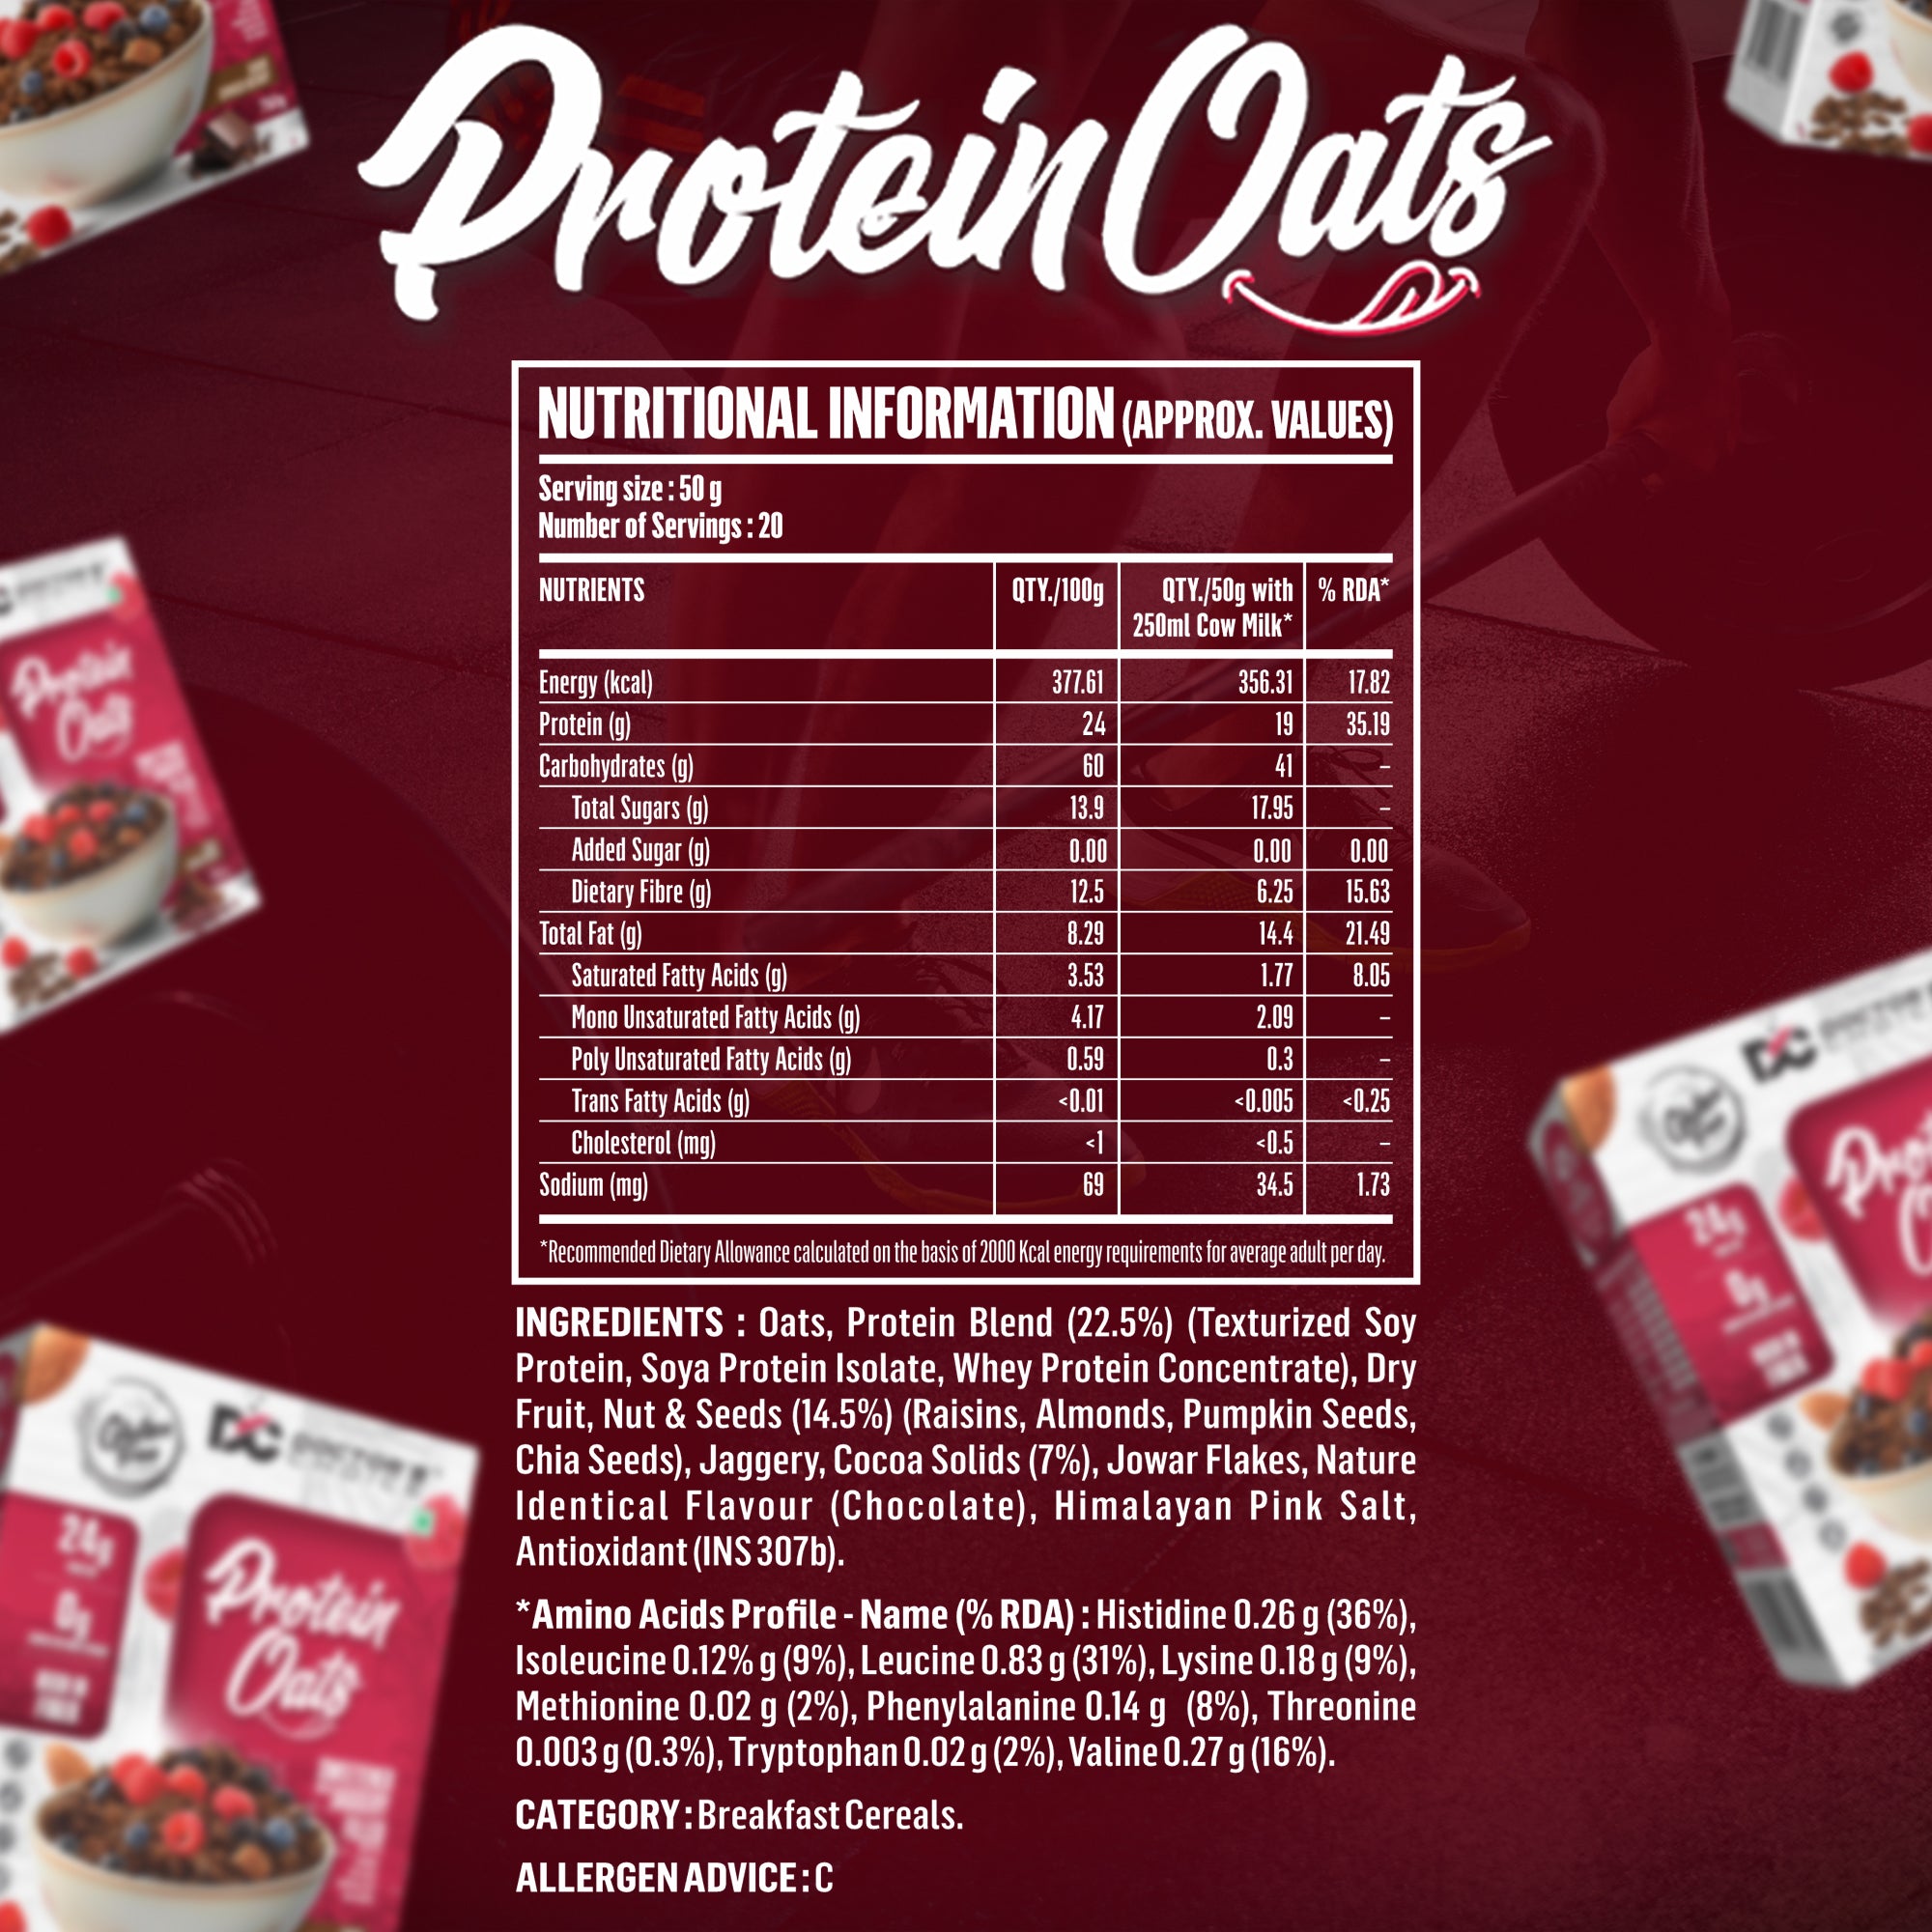 Doctor's Choice Protein Oats